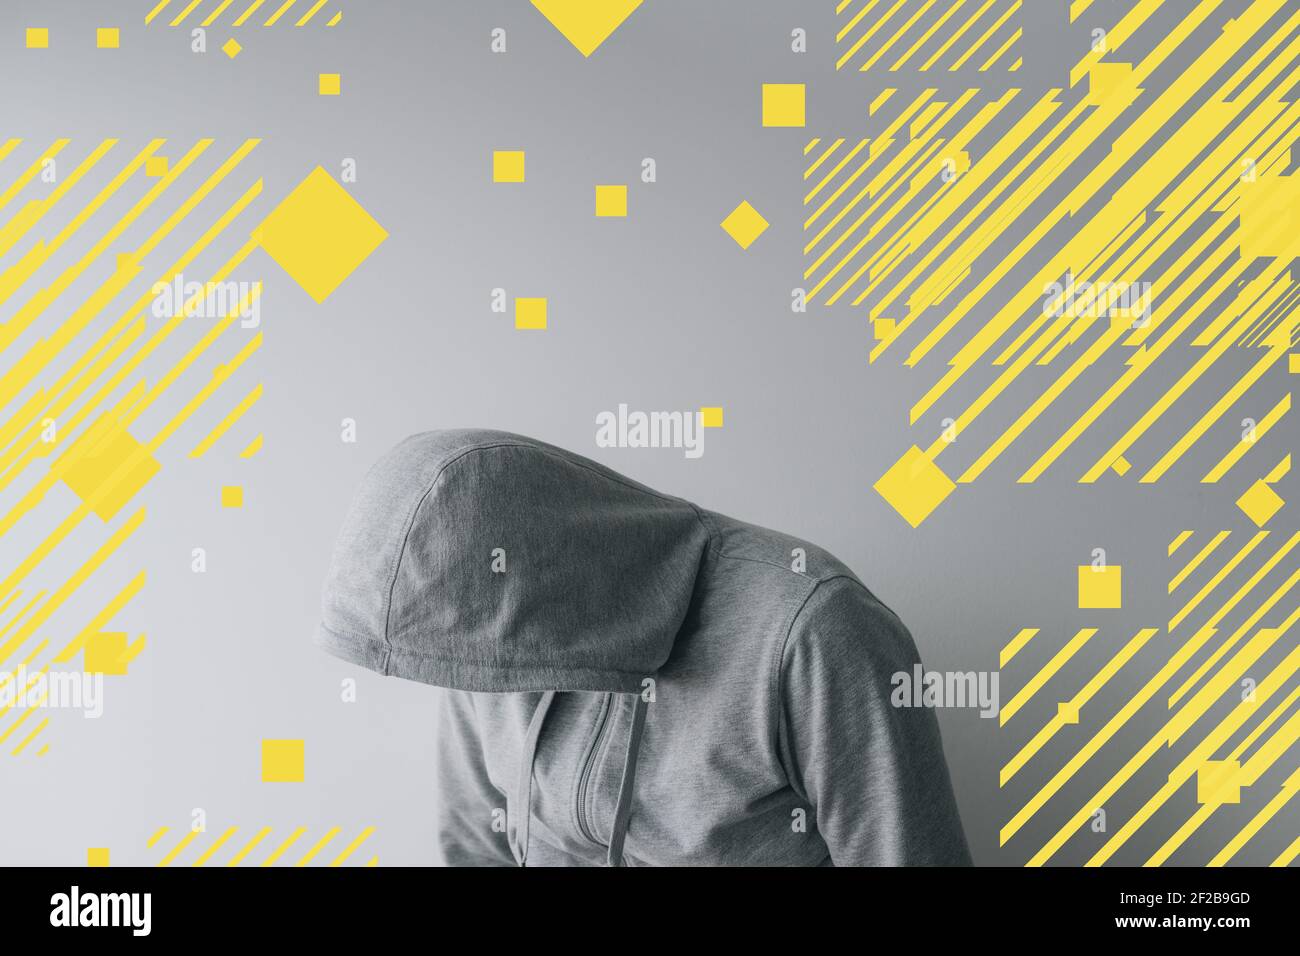 Depressed man, male person with hoodie and graphic element, mixed media photography Stock Photo